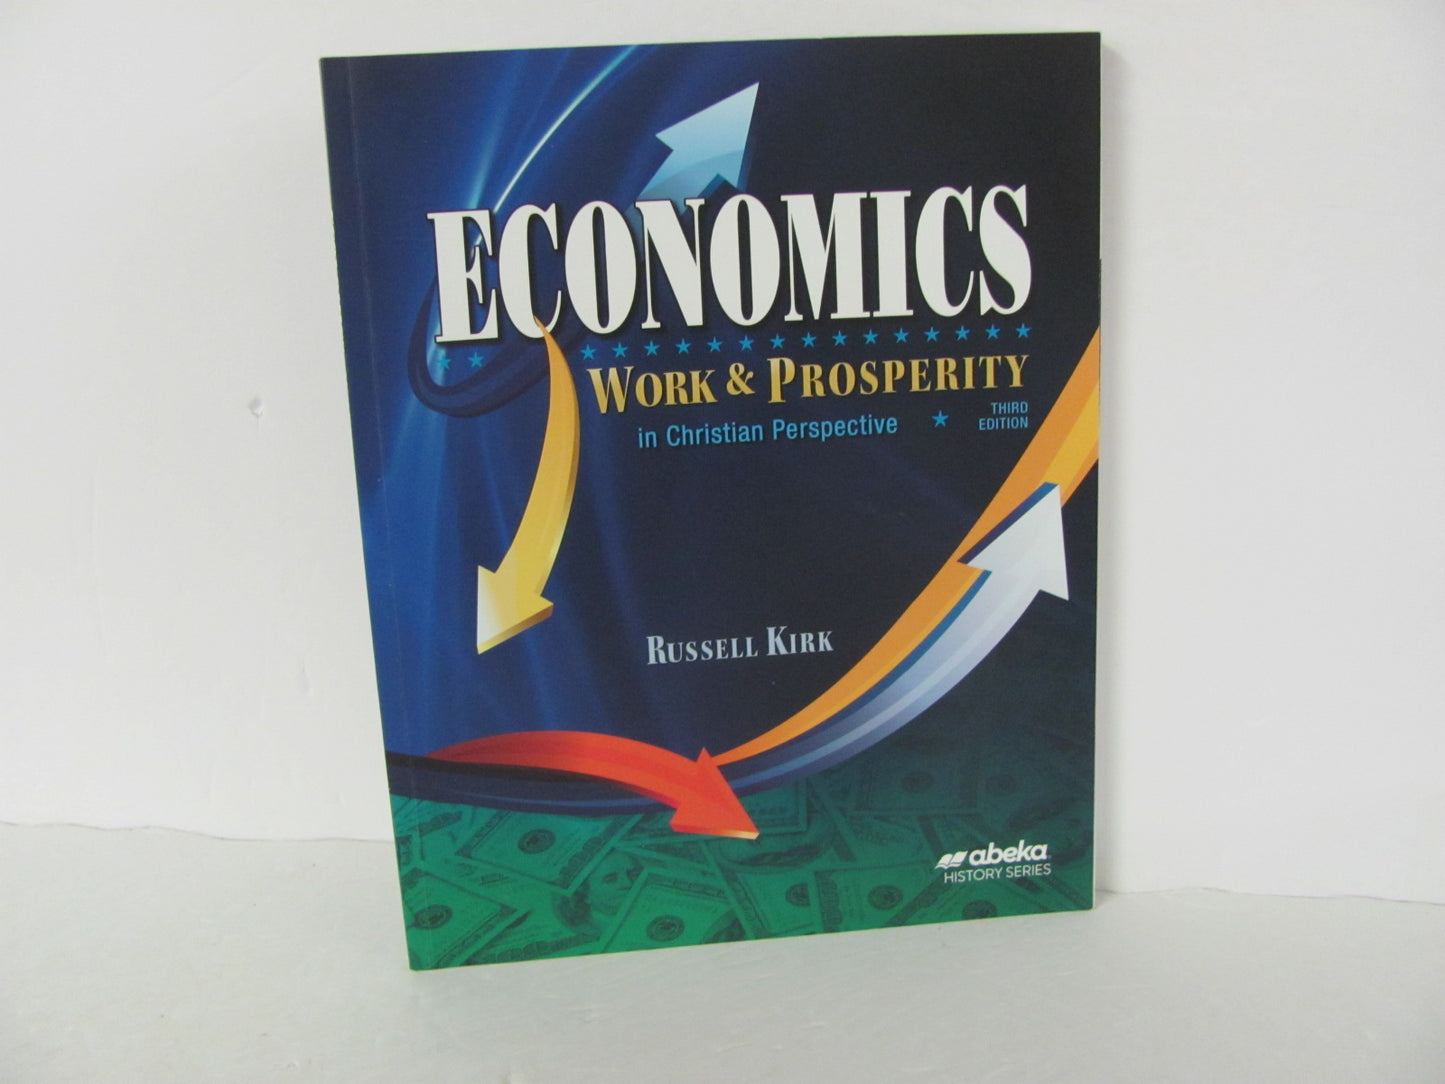 Economics Abeka Student Book Pre-Owned 12th Grade History Textbooks